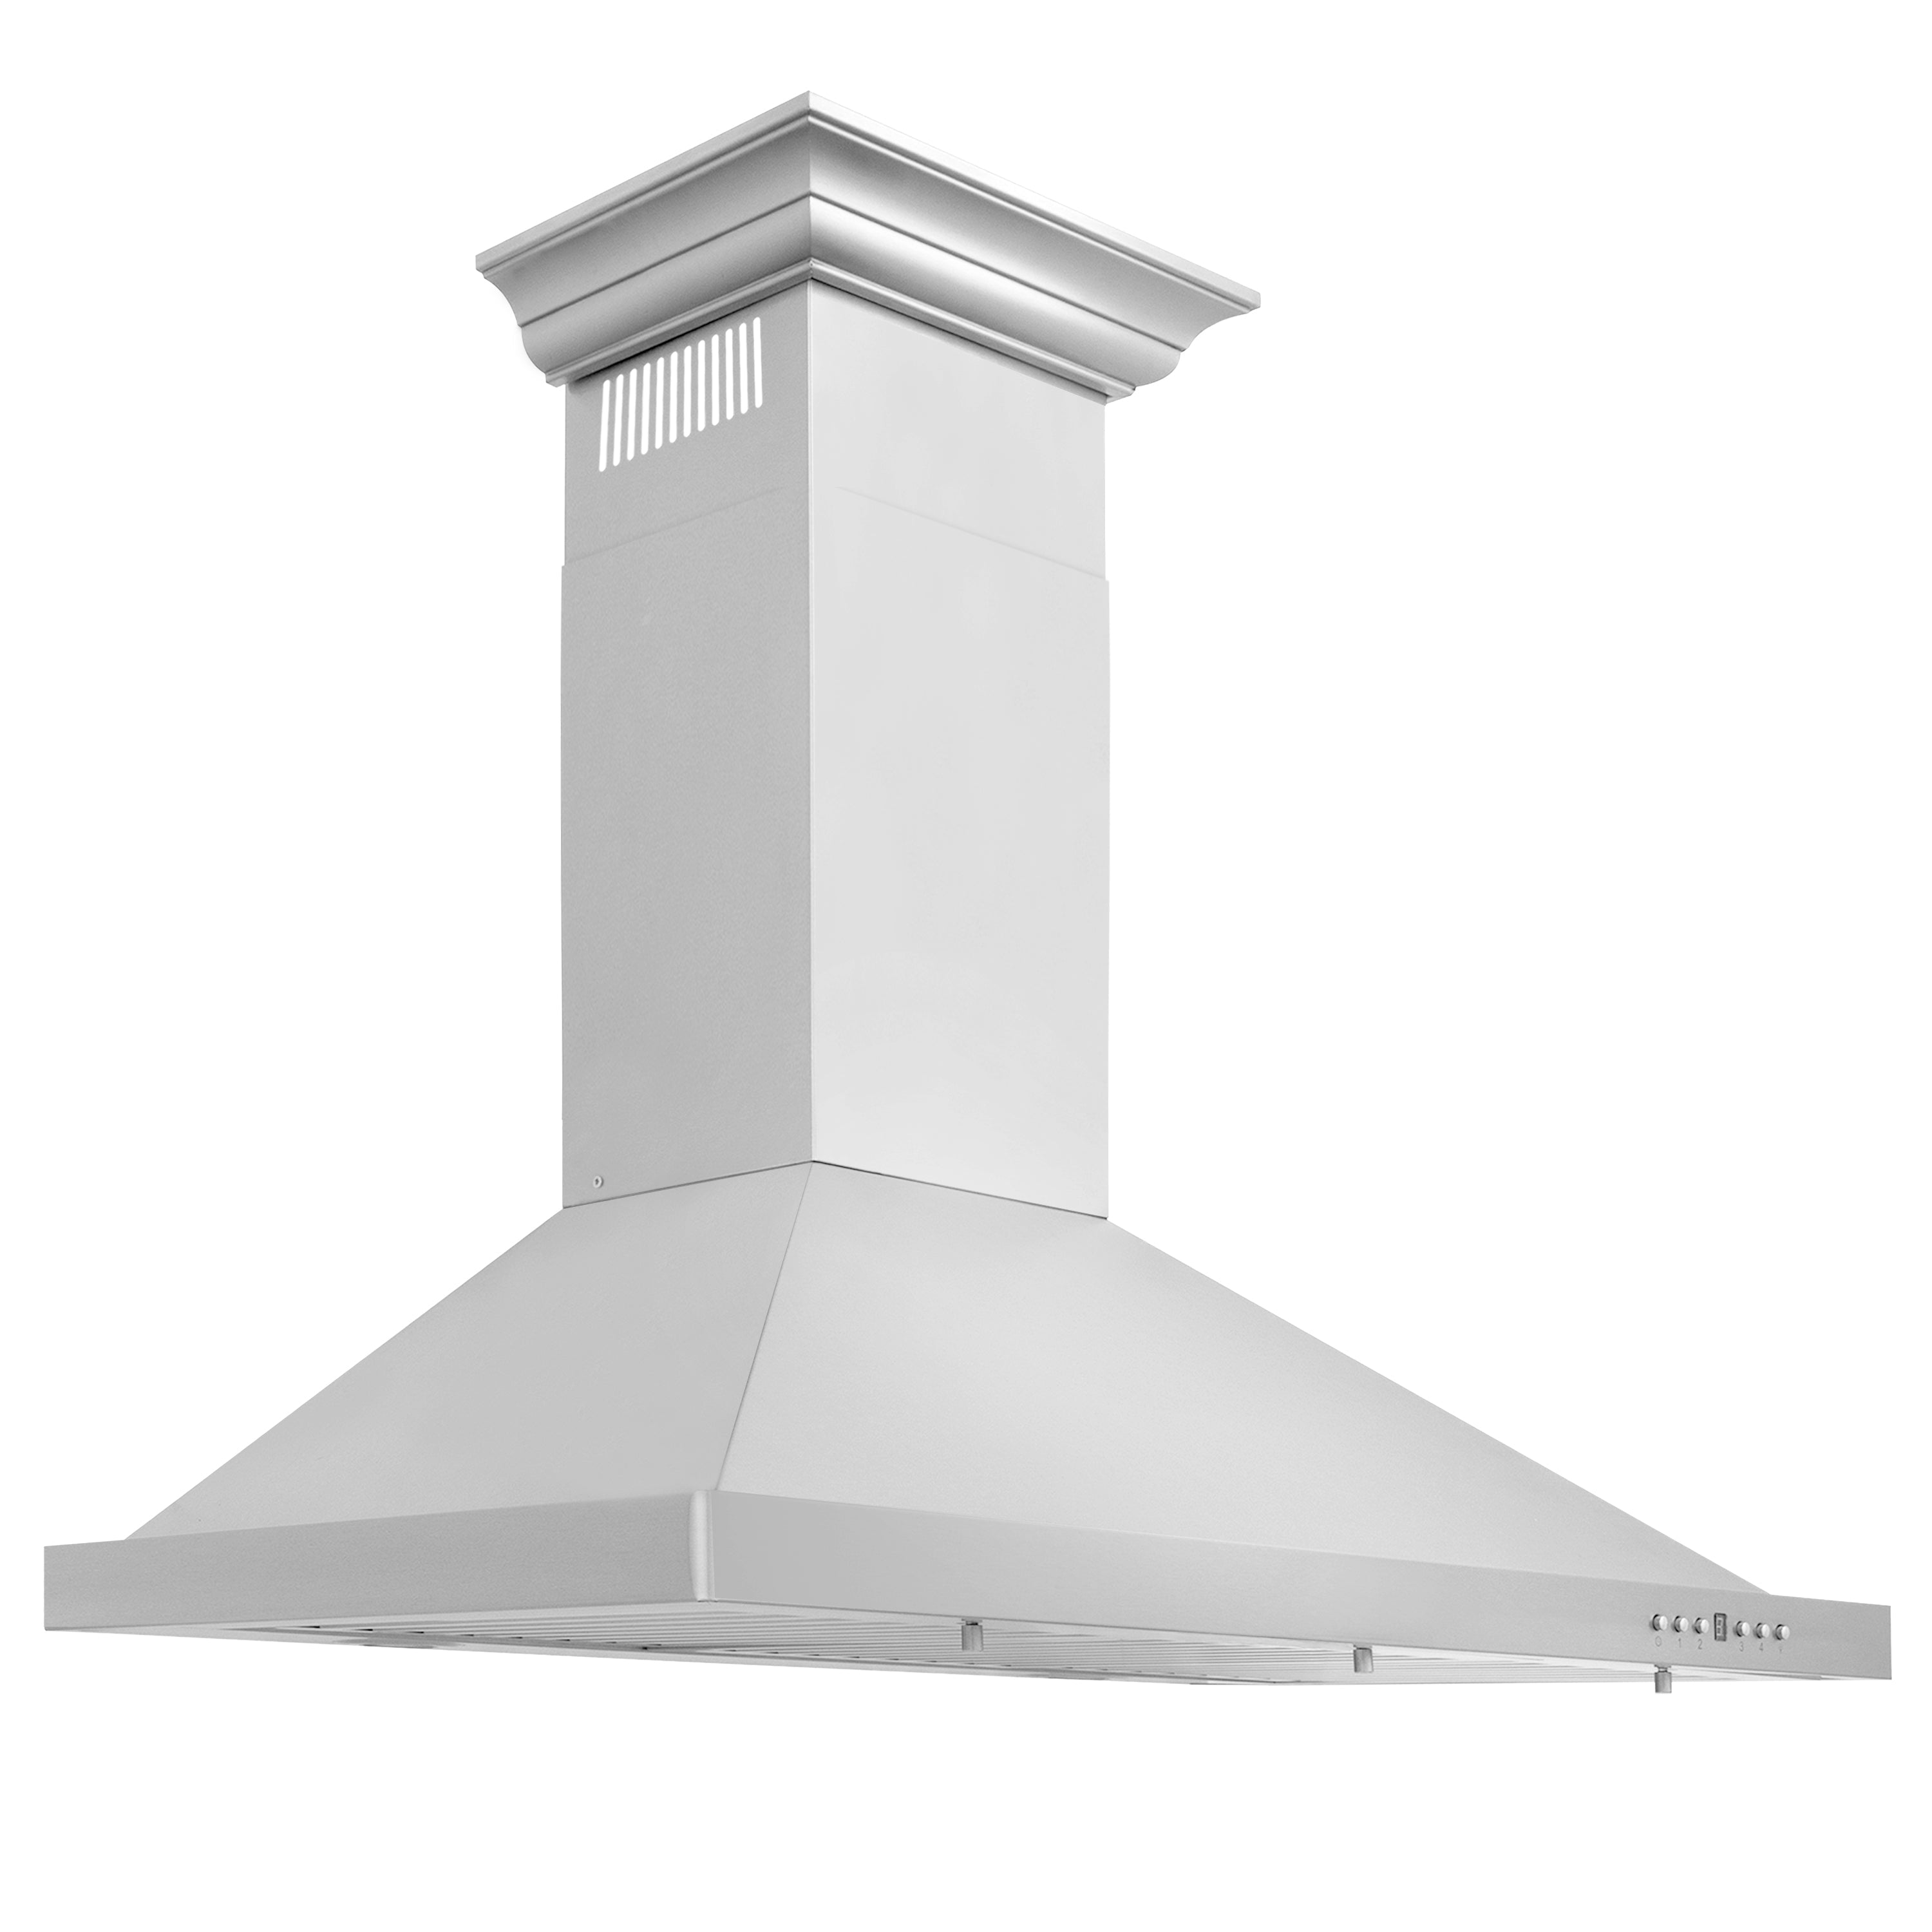 ZLINE Convertible Vent Wall Mount Range Hood in Stainless Steel with Crown Molding (KBCRN) - New Star Living